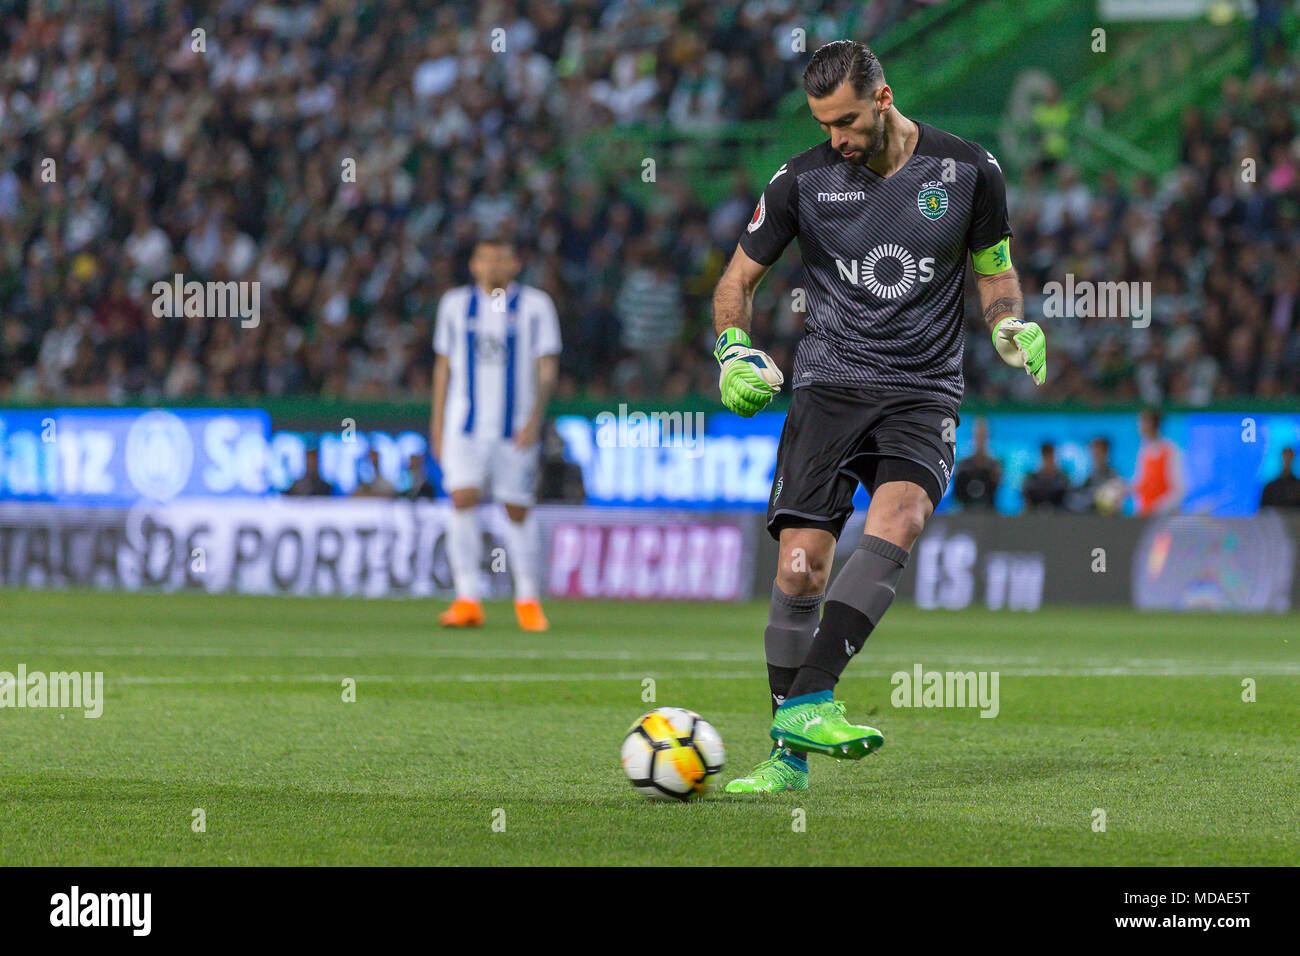 April 18, 2018. Lisbon, Portugal. Sporting's goalkeeper from Portugal Rui Patricio (1) in action during the game Sporting CP vs FC Porto © Alexandre de Sousa/Alamy Live News Stock Photo